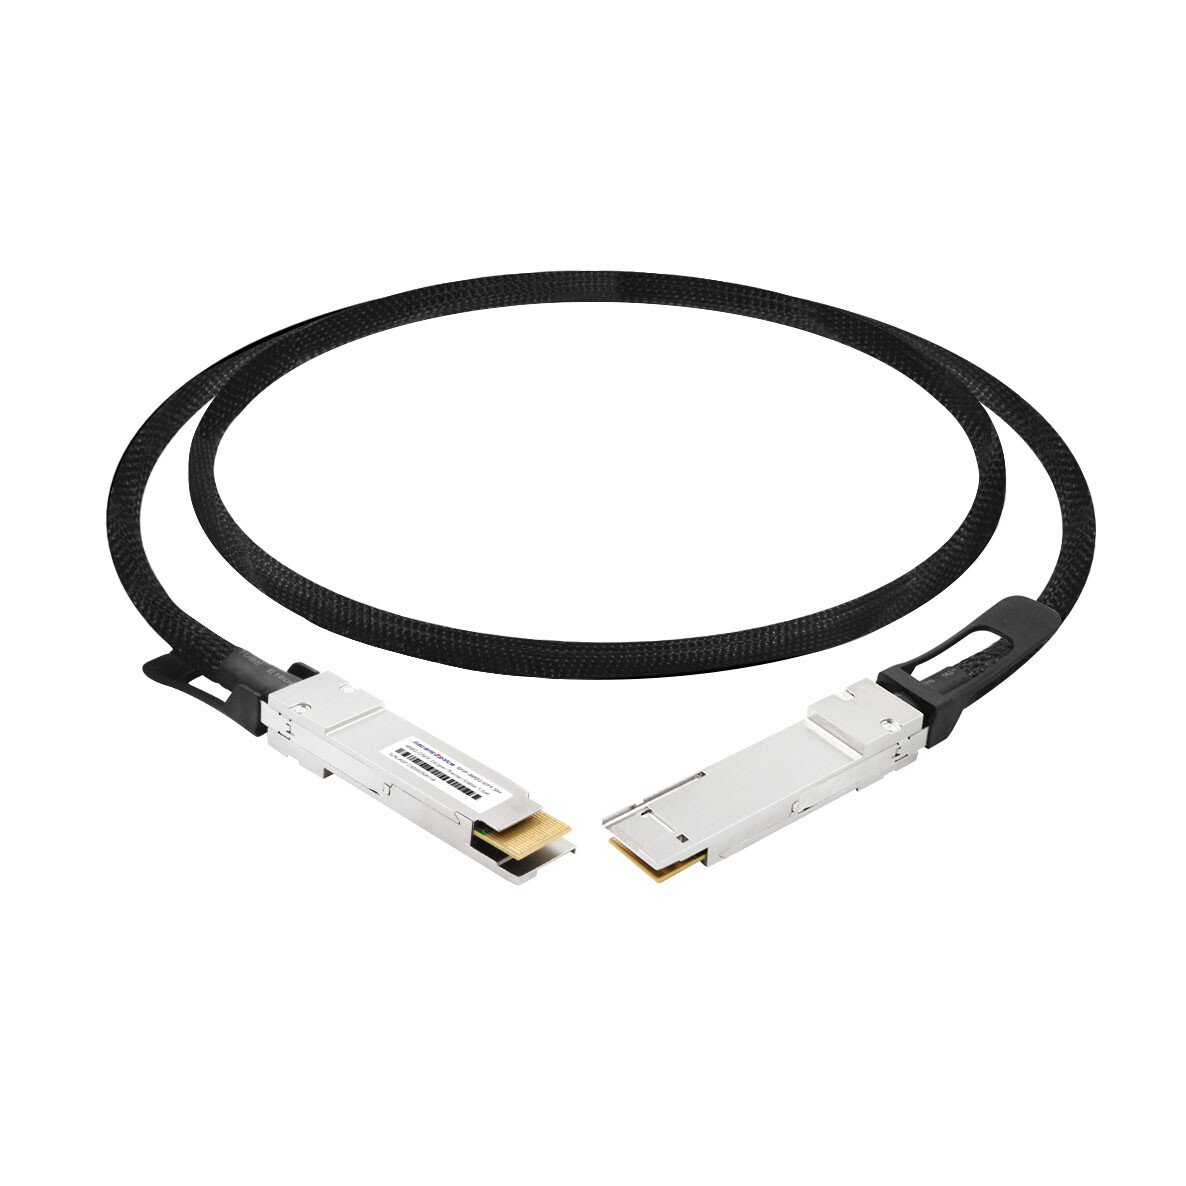 800G OSFP Copper DAC Cable,1.5 Meter,Passive